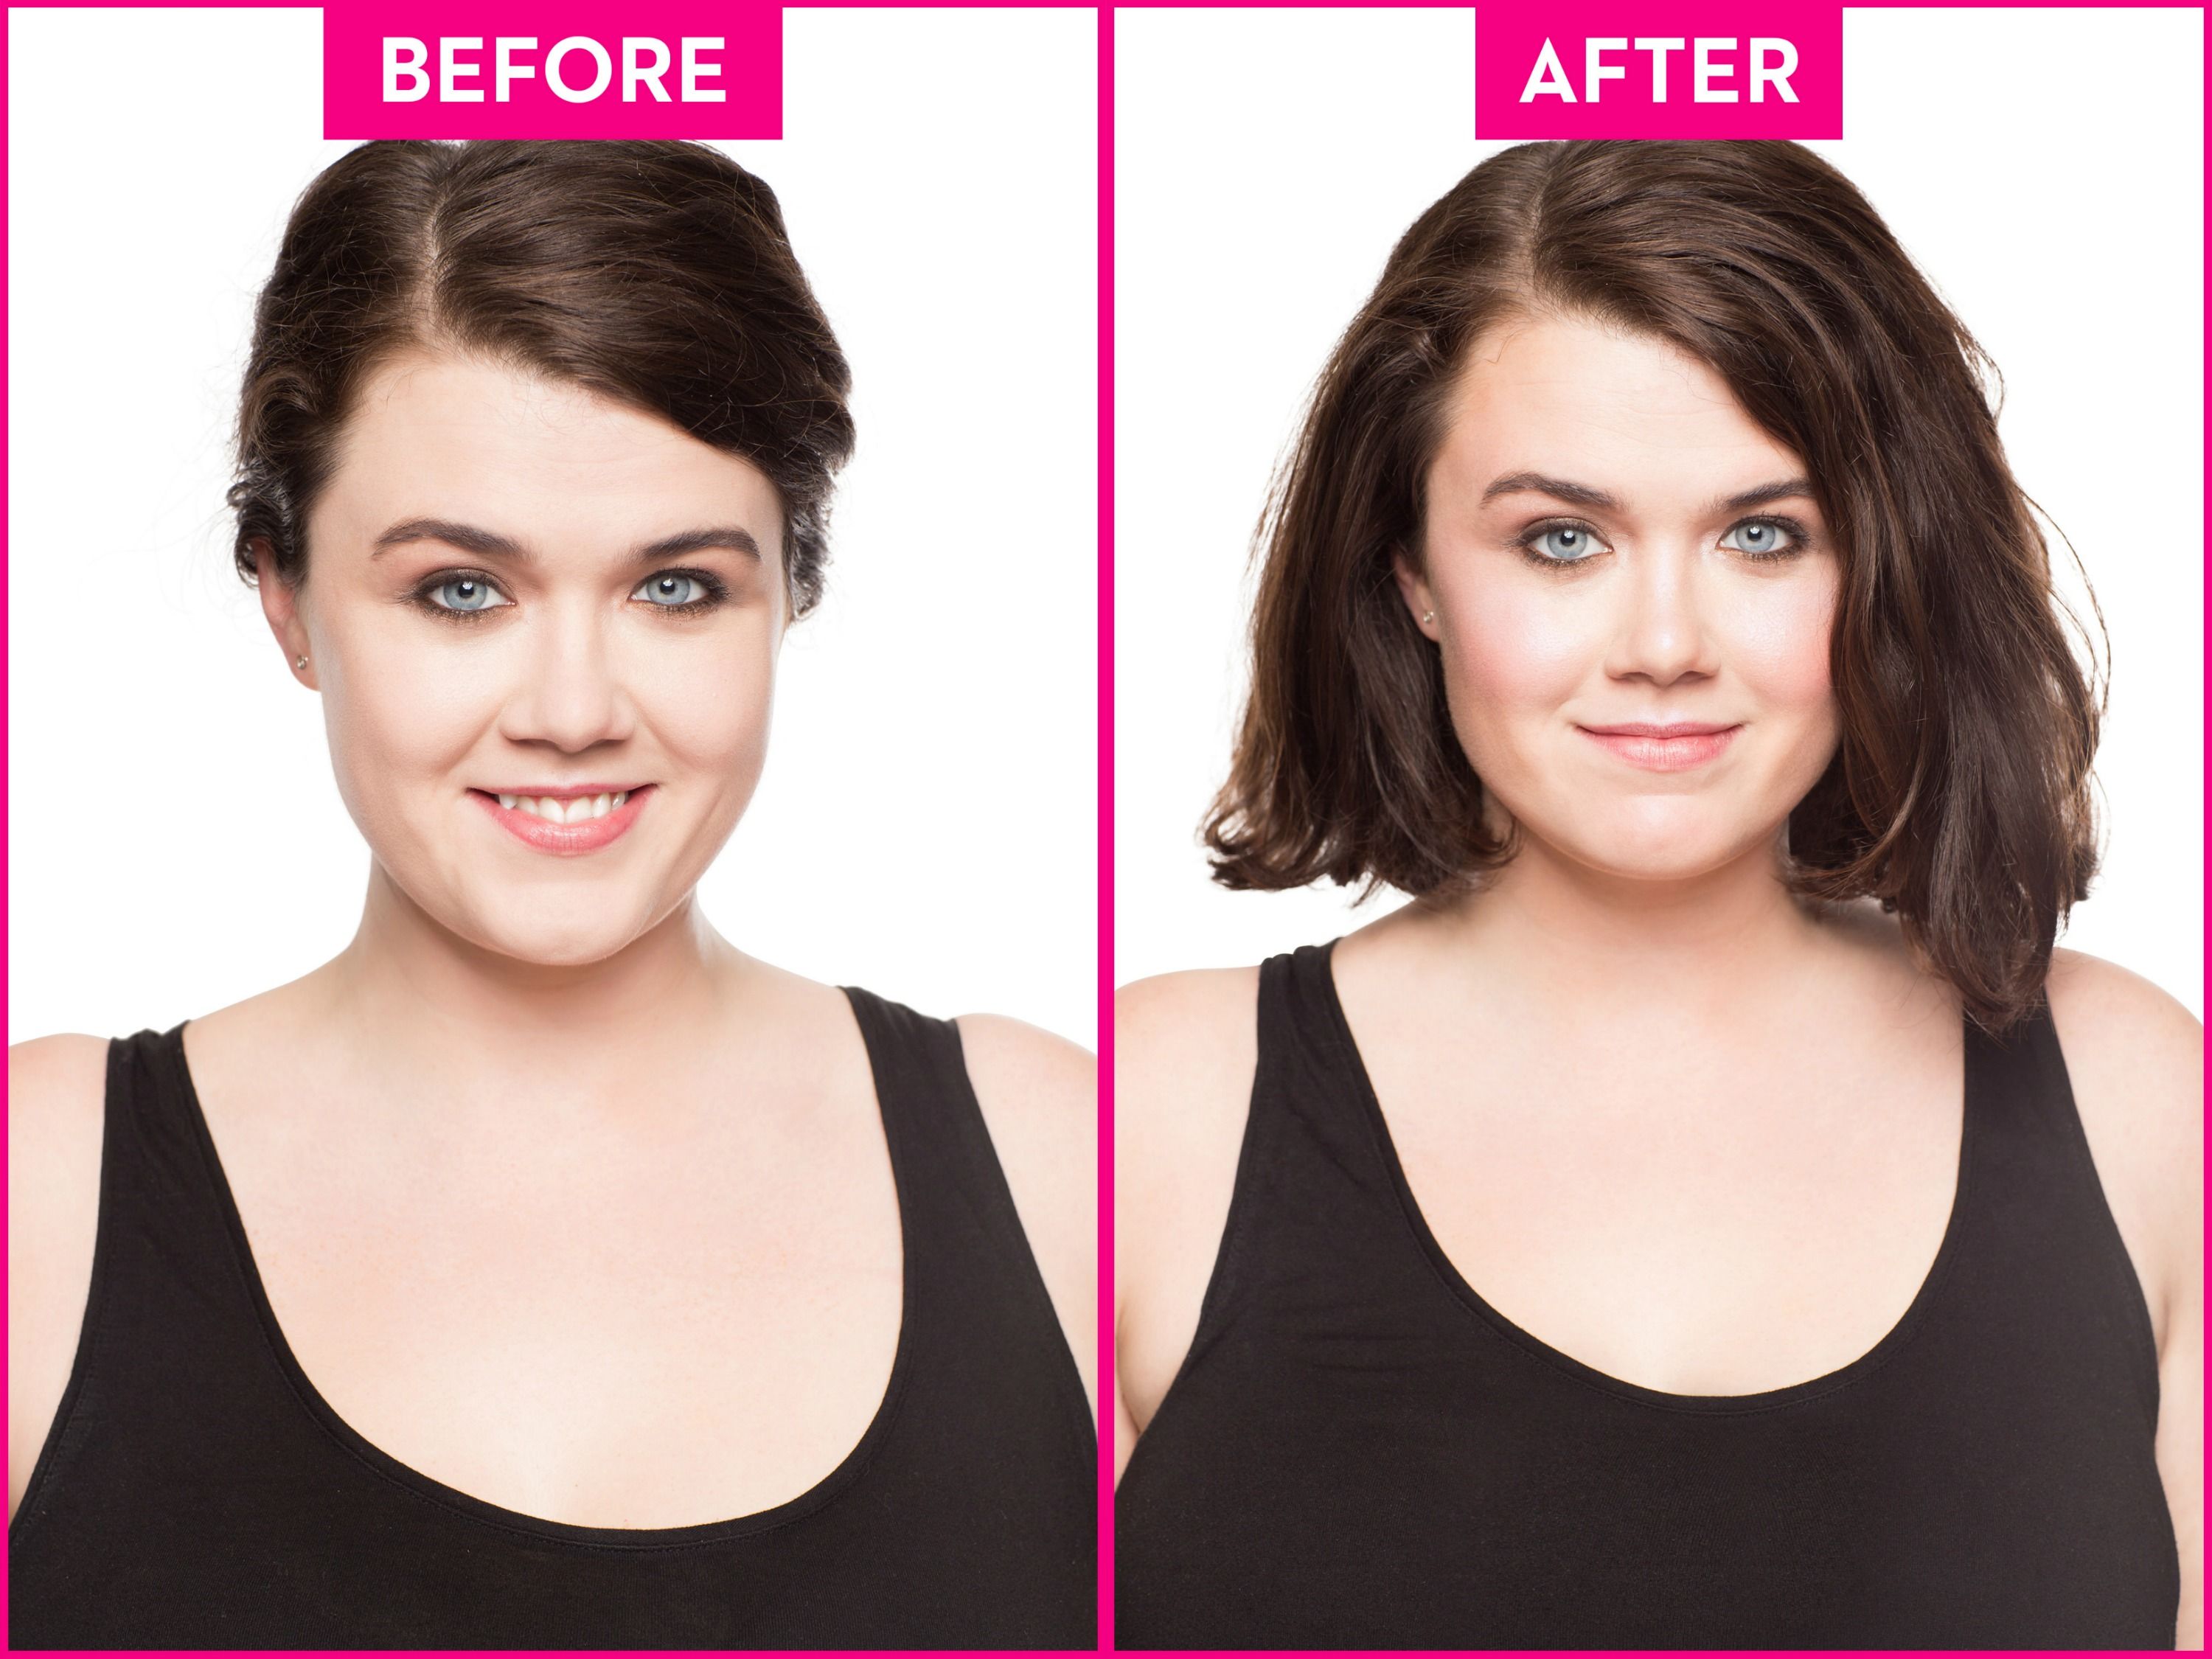 How To Slim A Round Face In 3 Easy